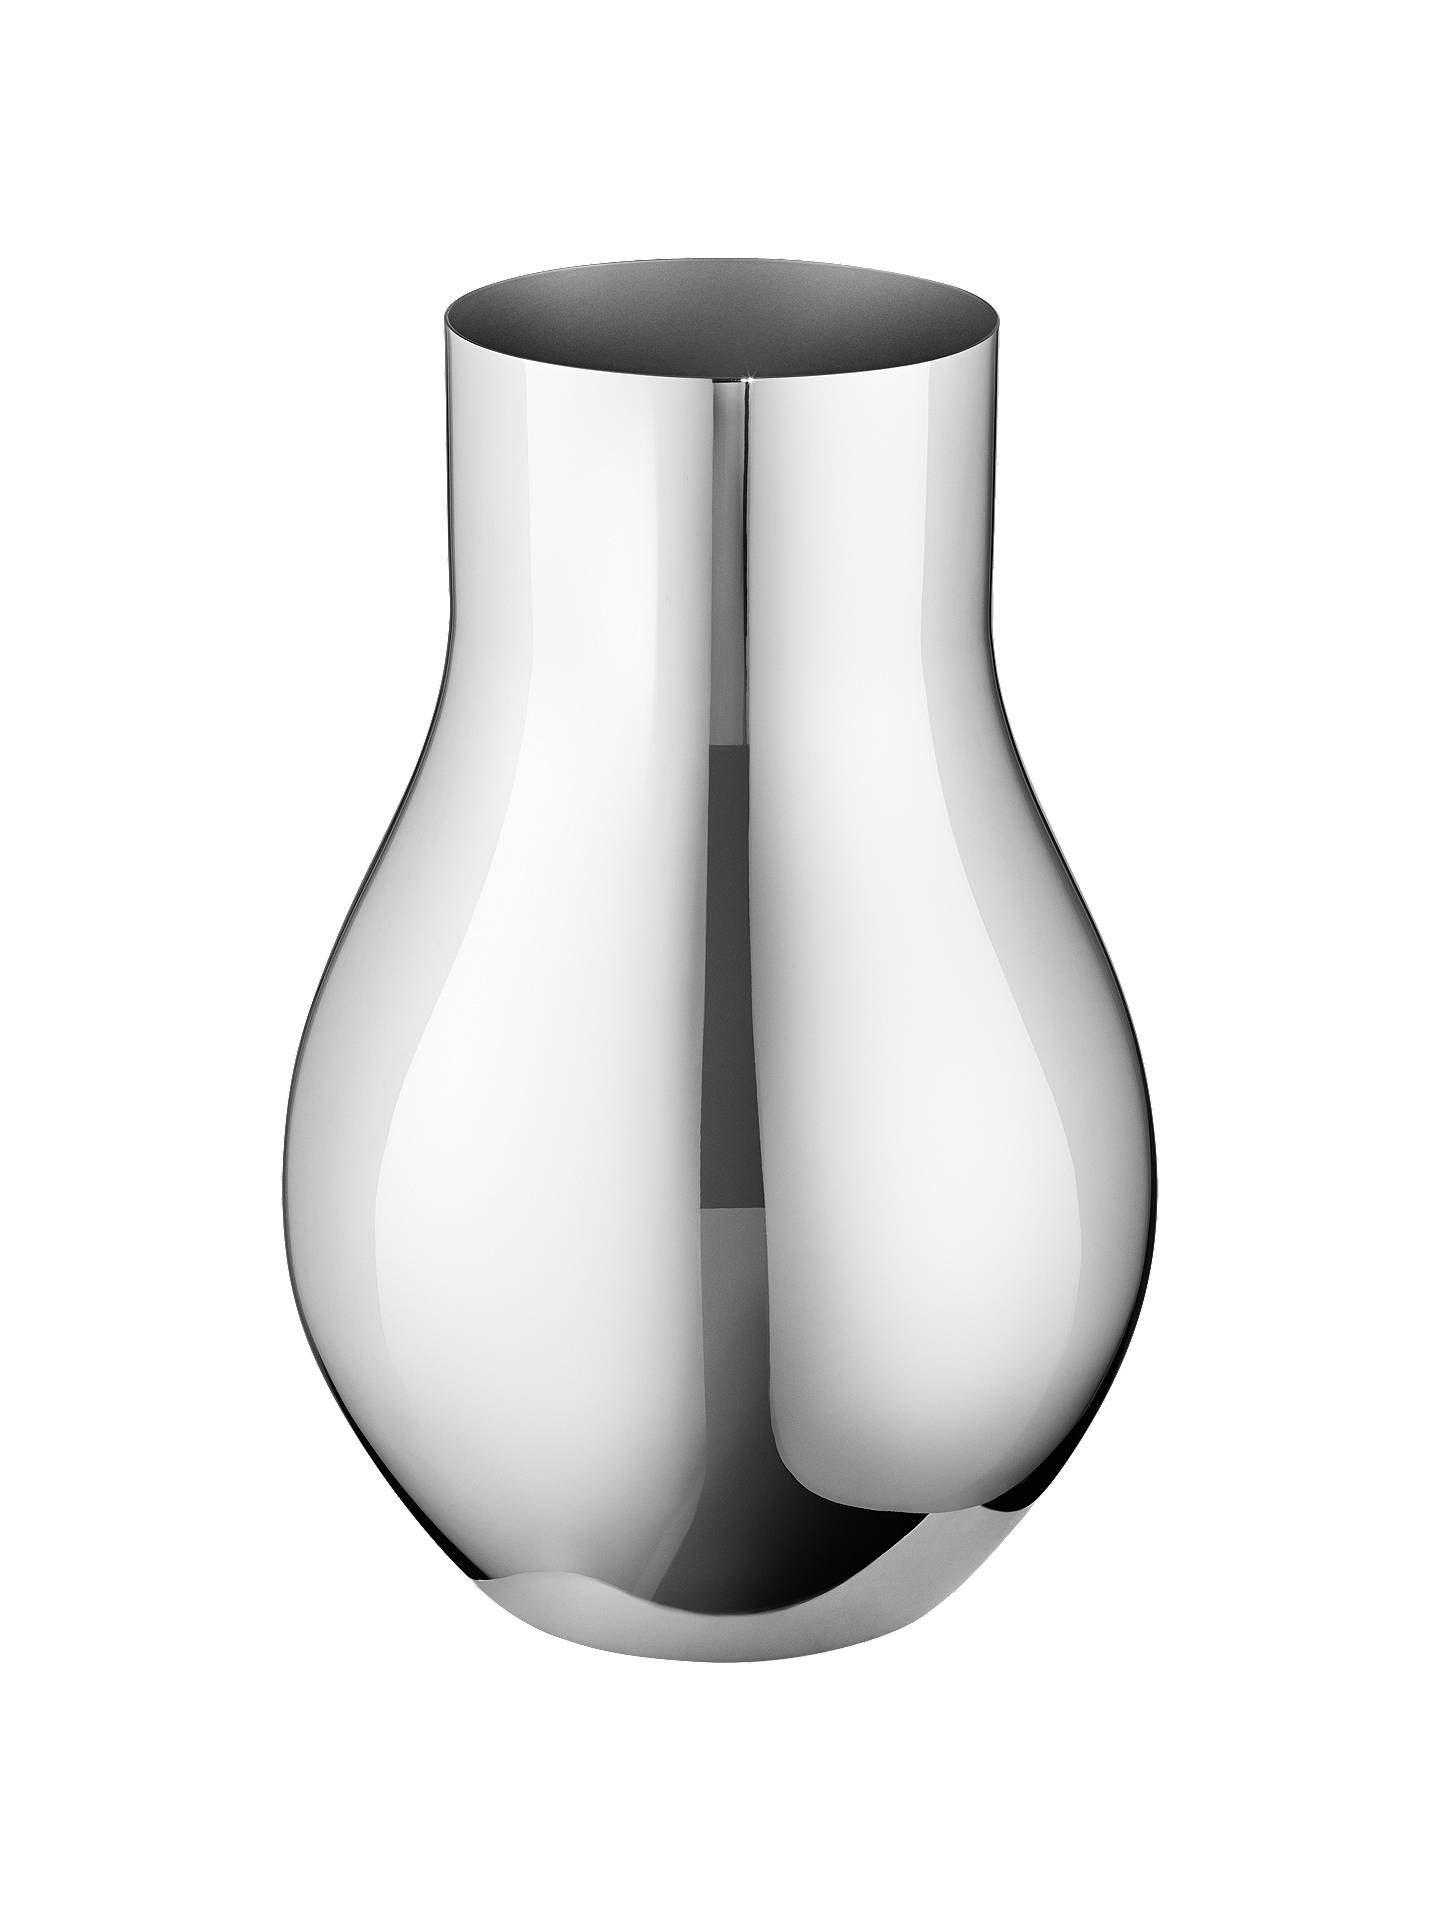 georg jensen cafu vase of georg jensen cafu vase stainless steel 21 6cm at john lewis partners for buygeorg jensen cafu vase stainless steel 21 6cm online at johnlewis com